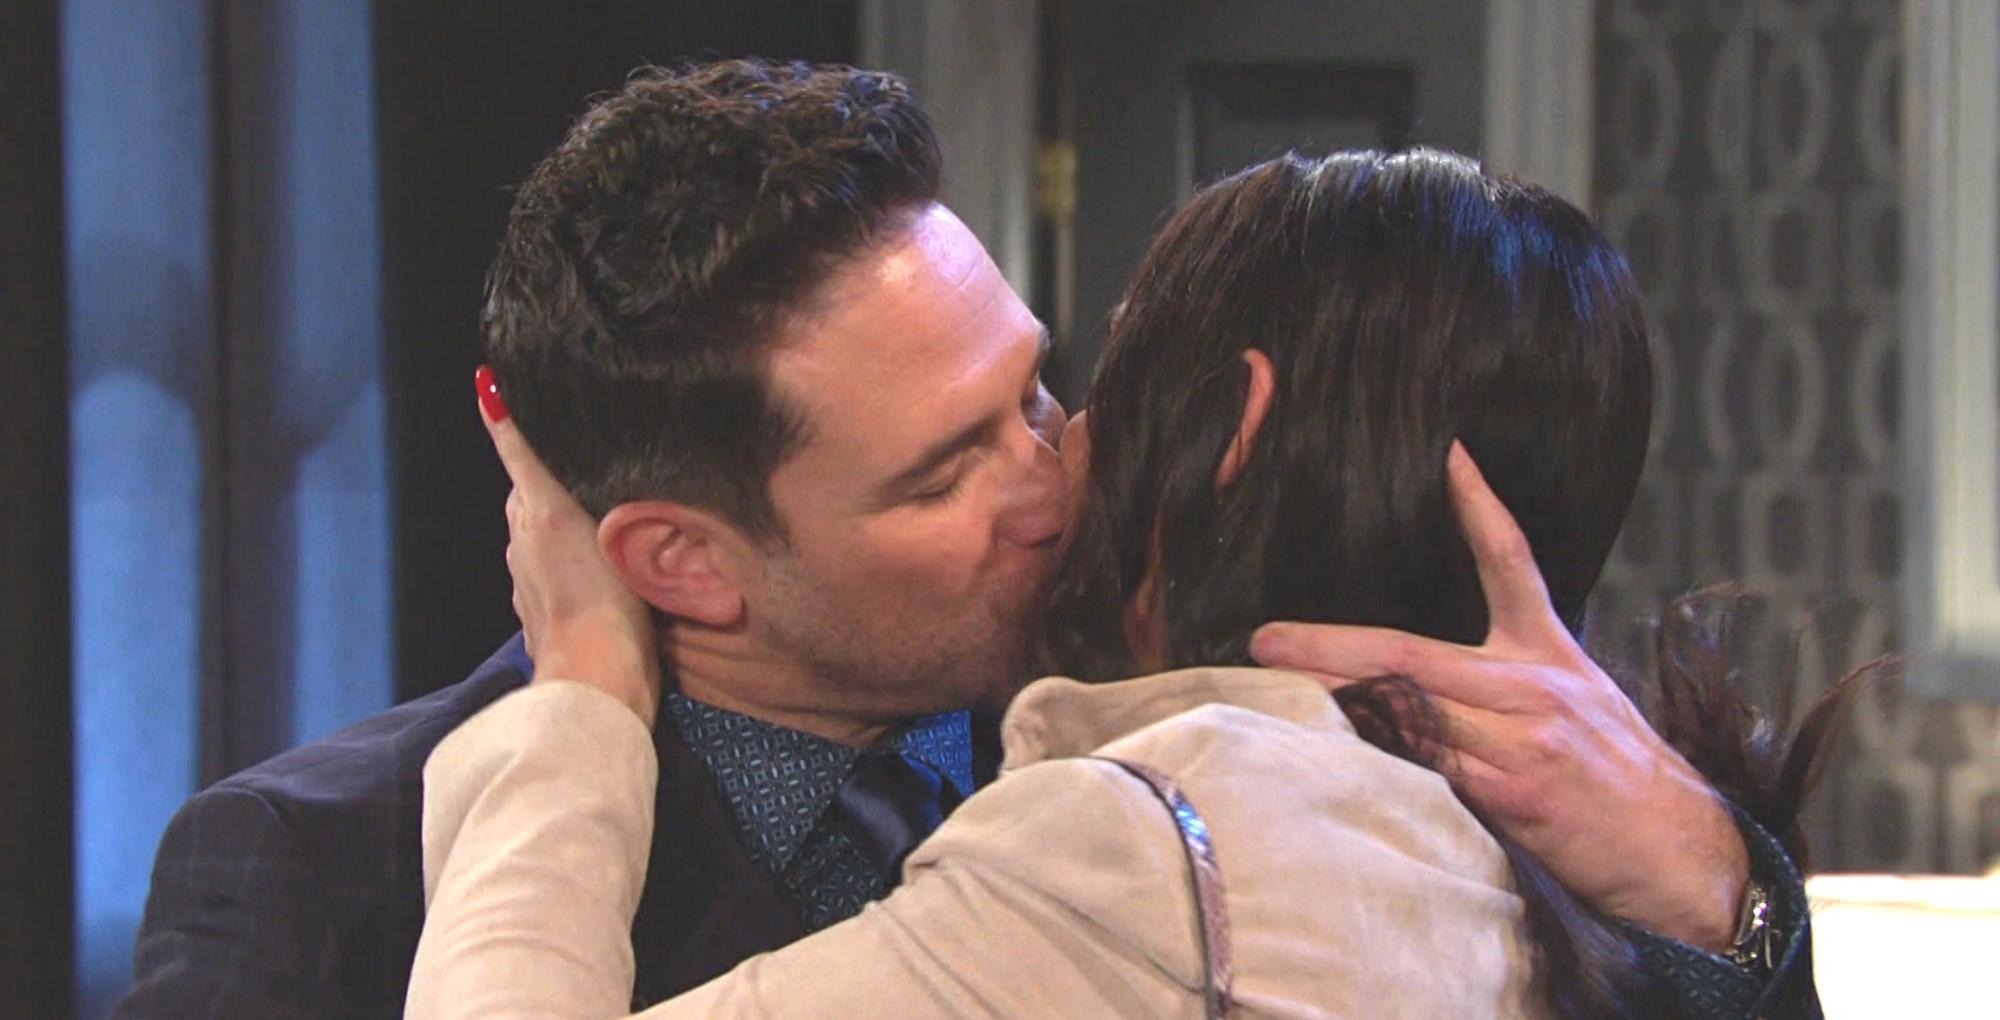 days of our lives recap for tuesday, march 28, 2023, stefan dimera and gabi locking lips